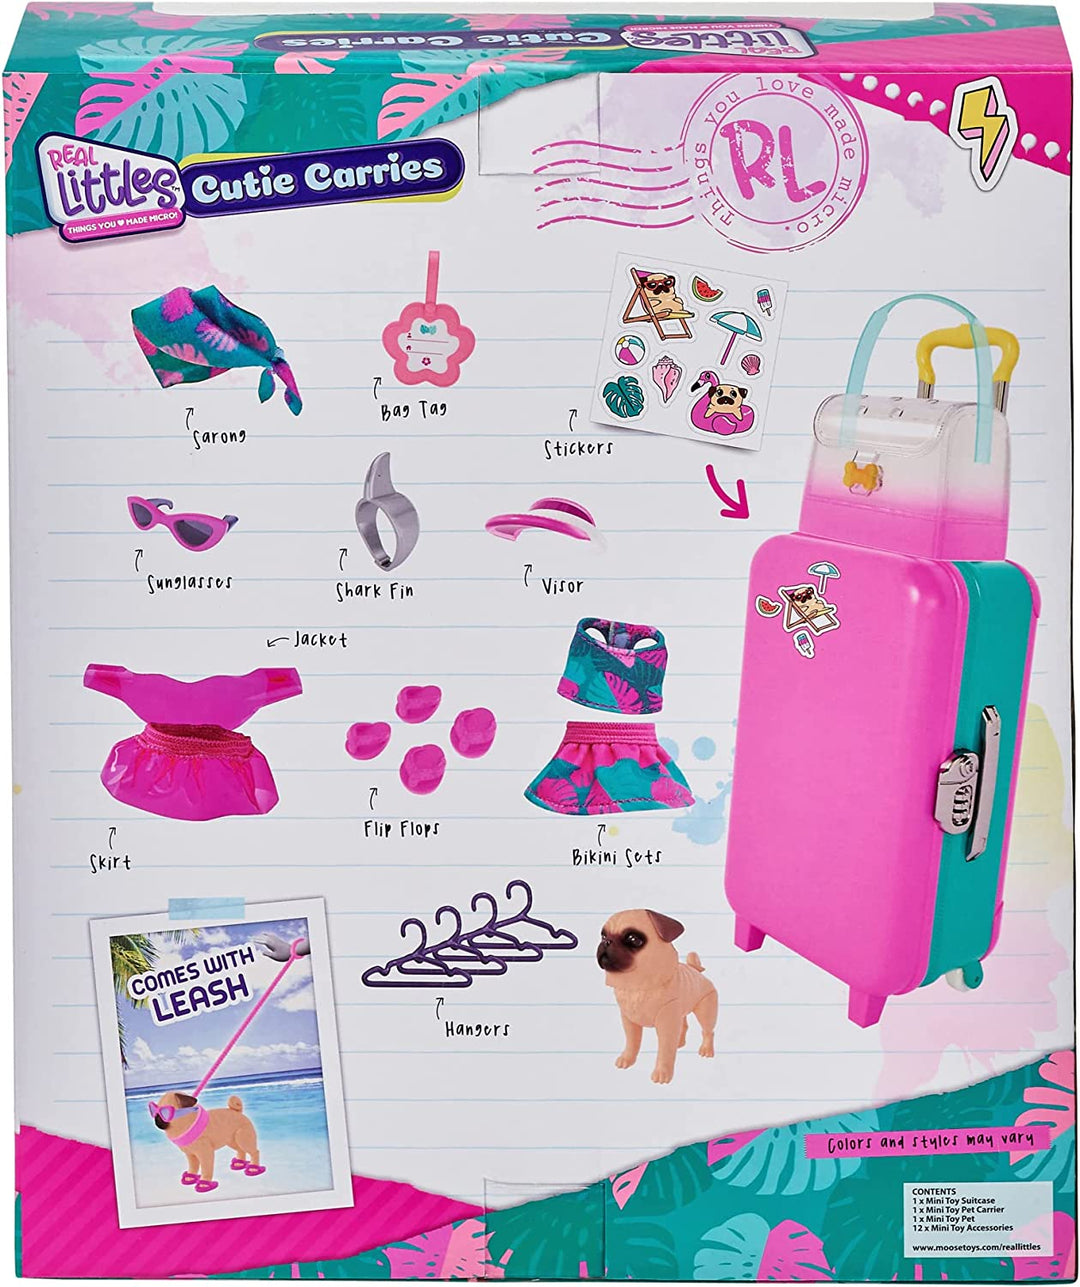 Real Littles 25392 Collectible Suitcase, Carrier with 1 Puppy and 12 Micro Worki